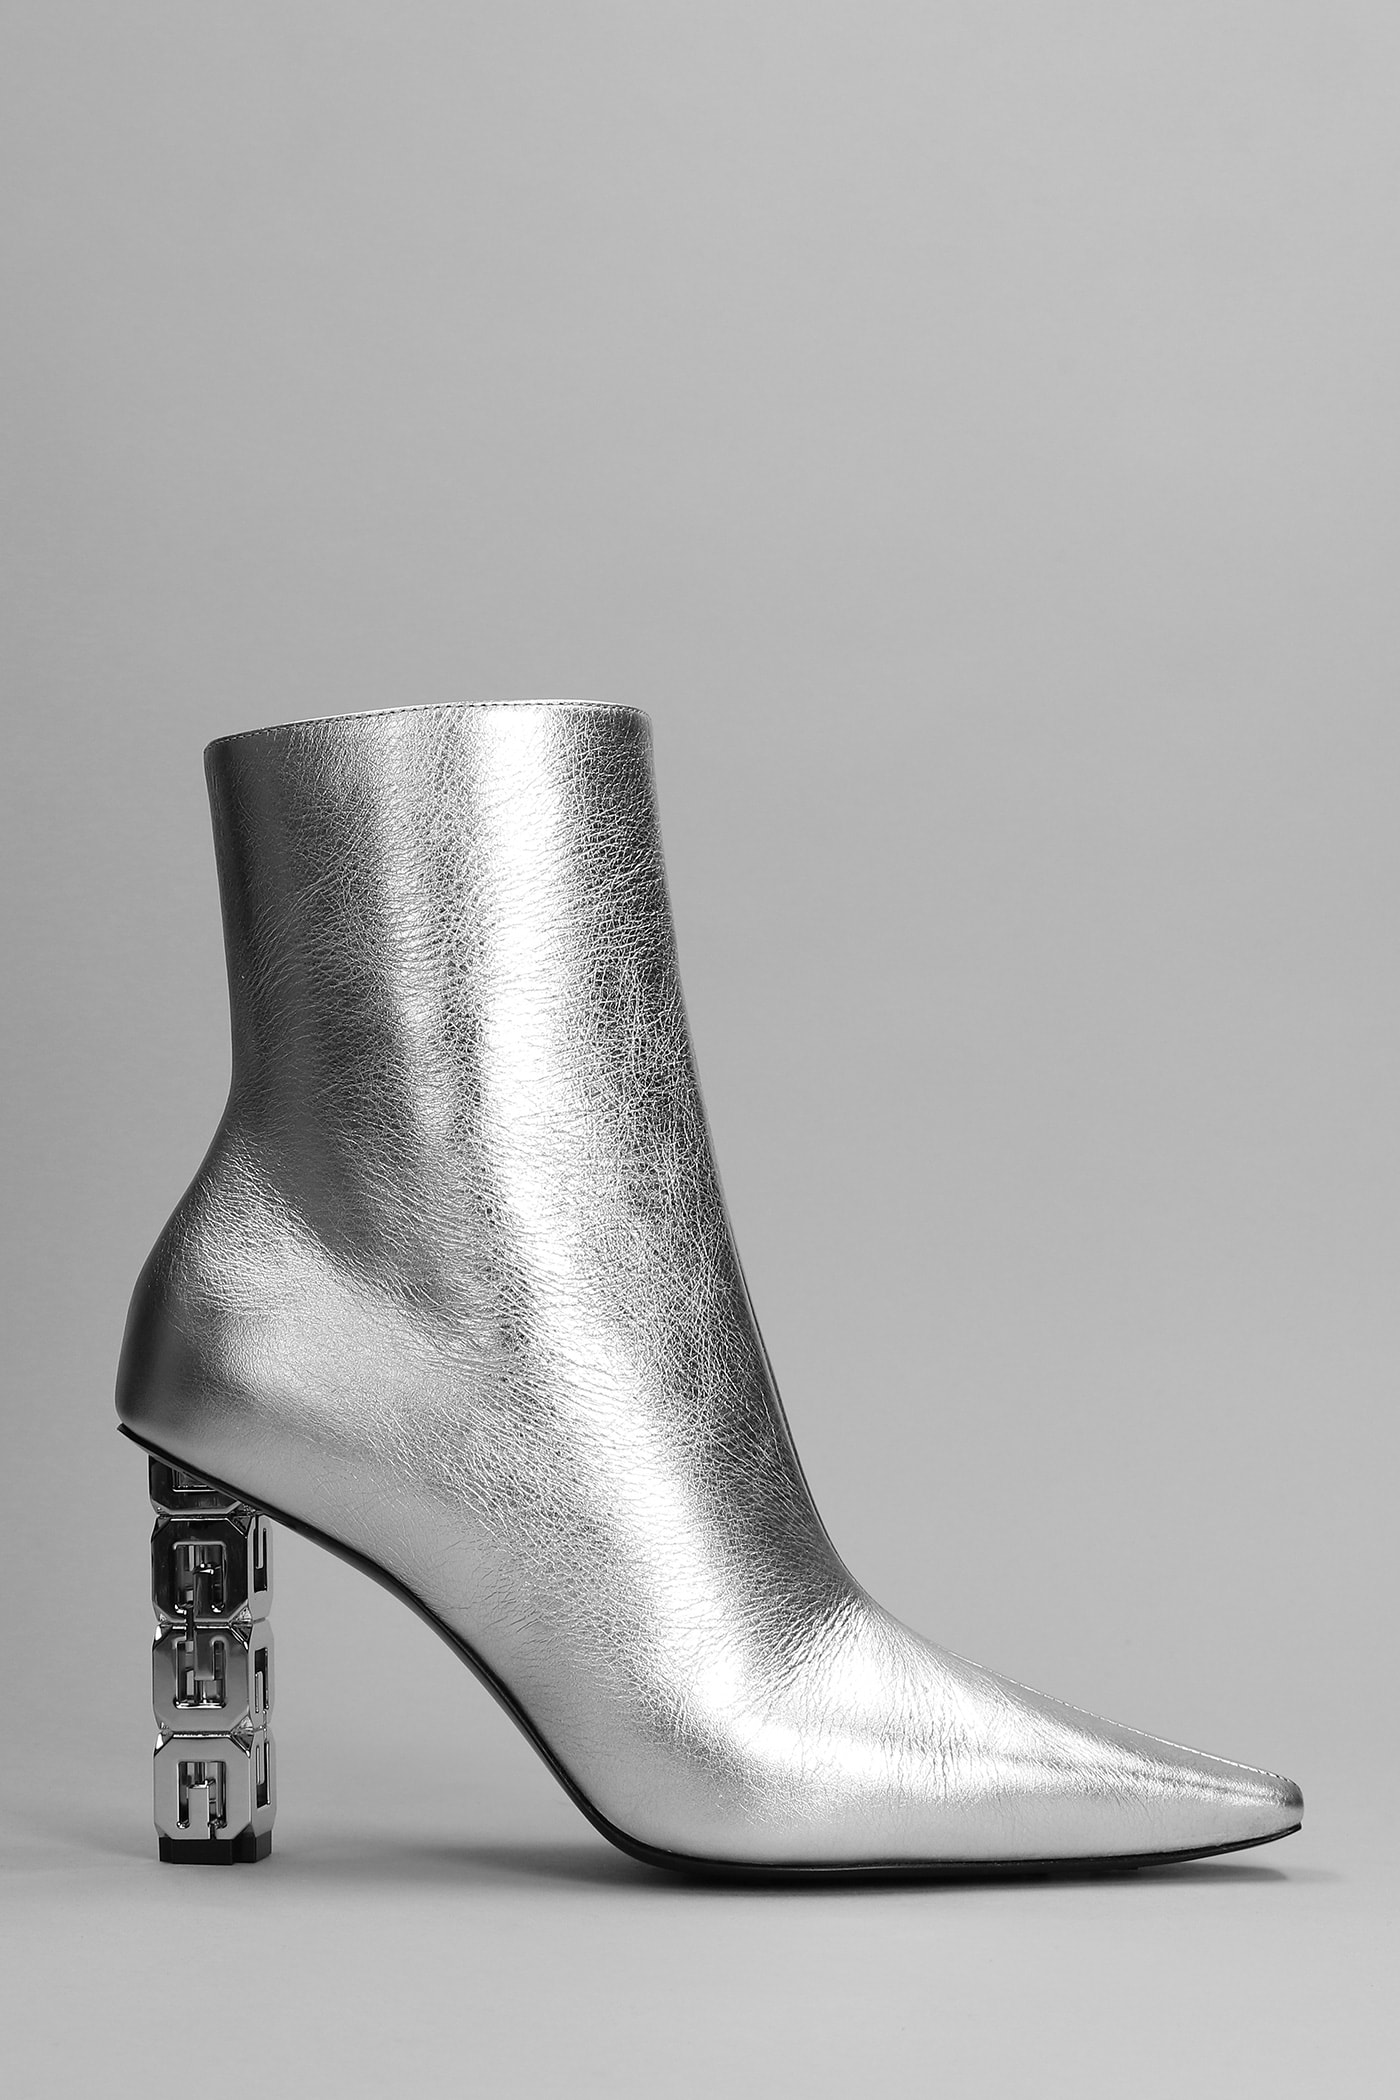 Givenchy High Heels Ankle Boots In Silver Leather